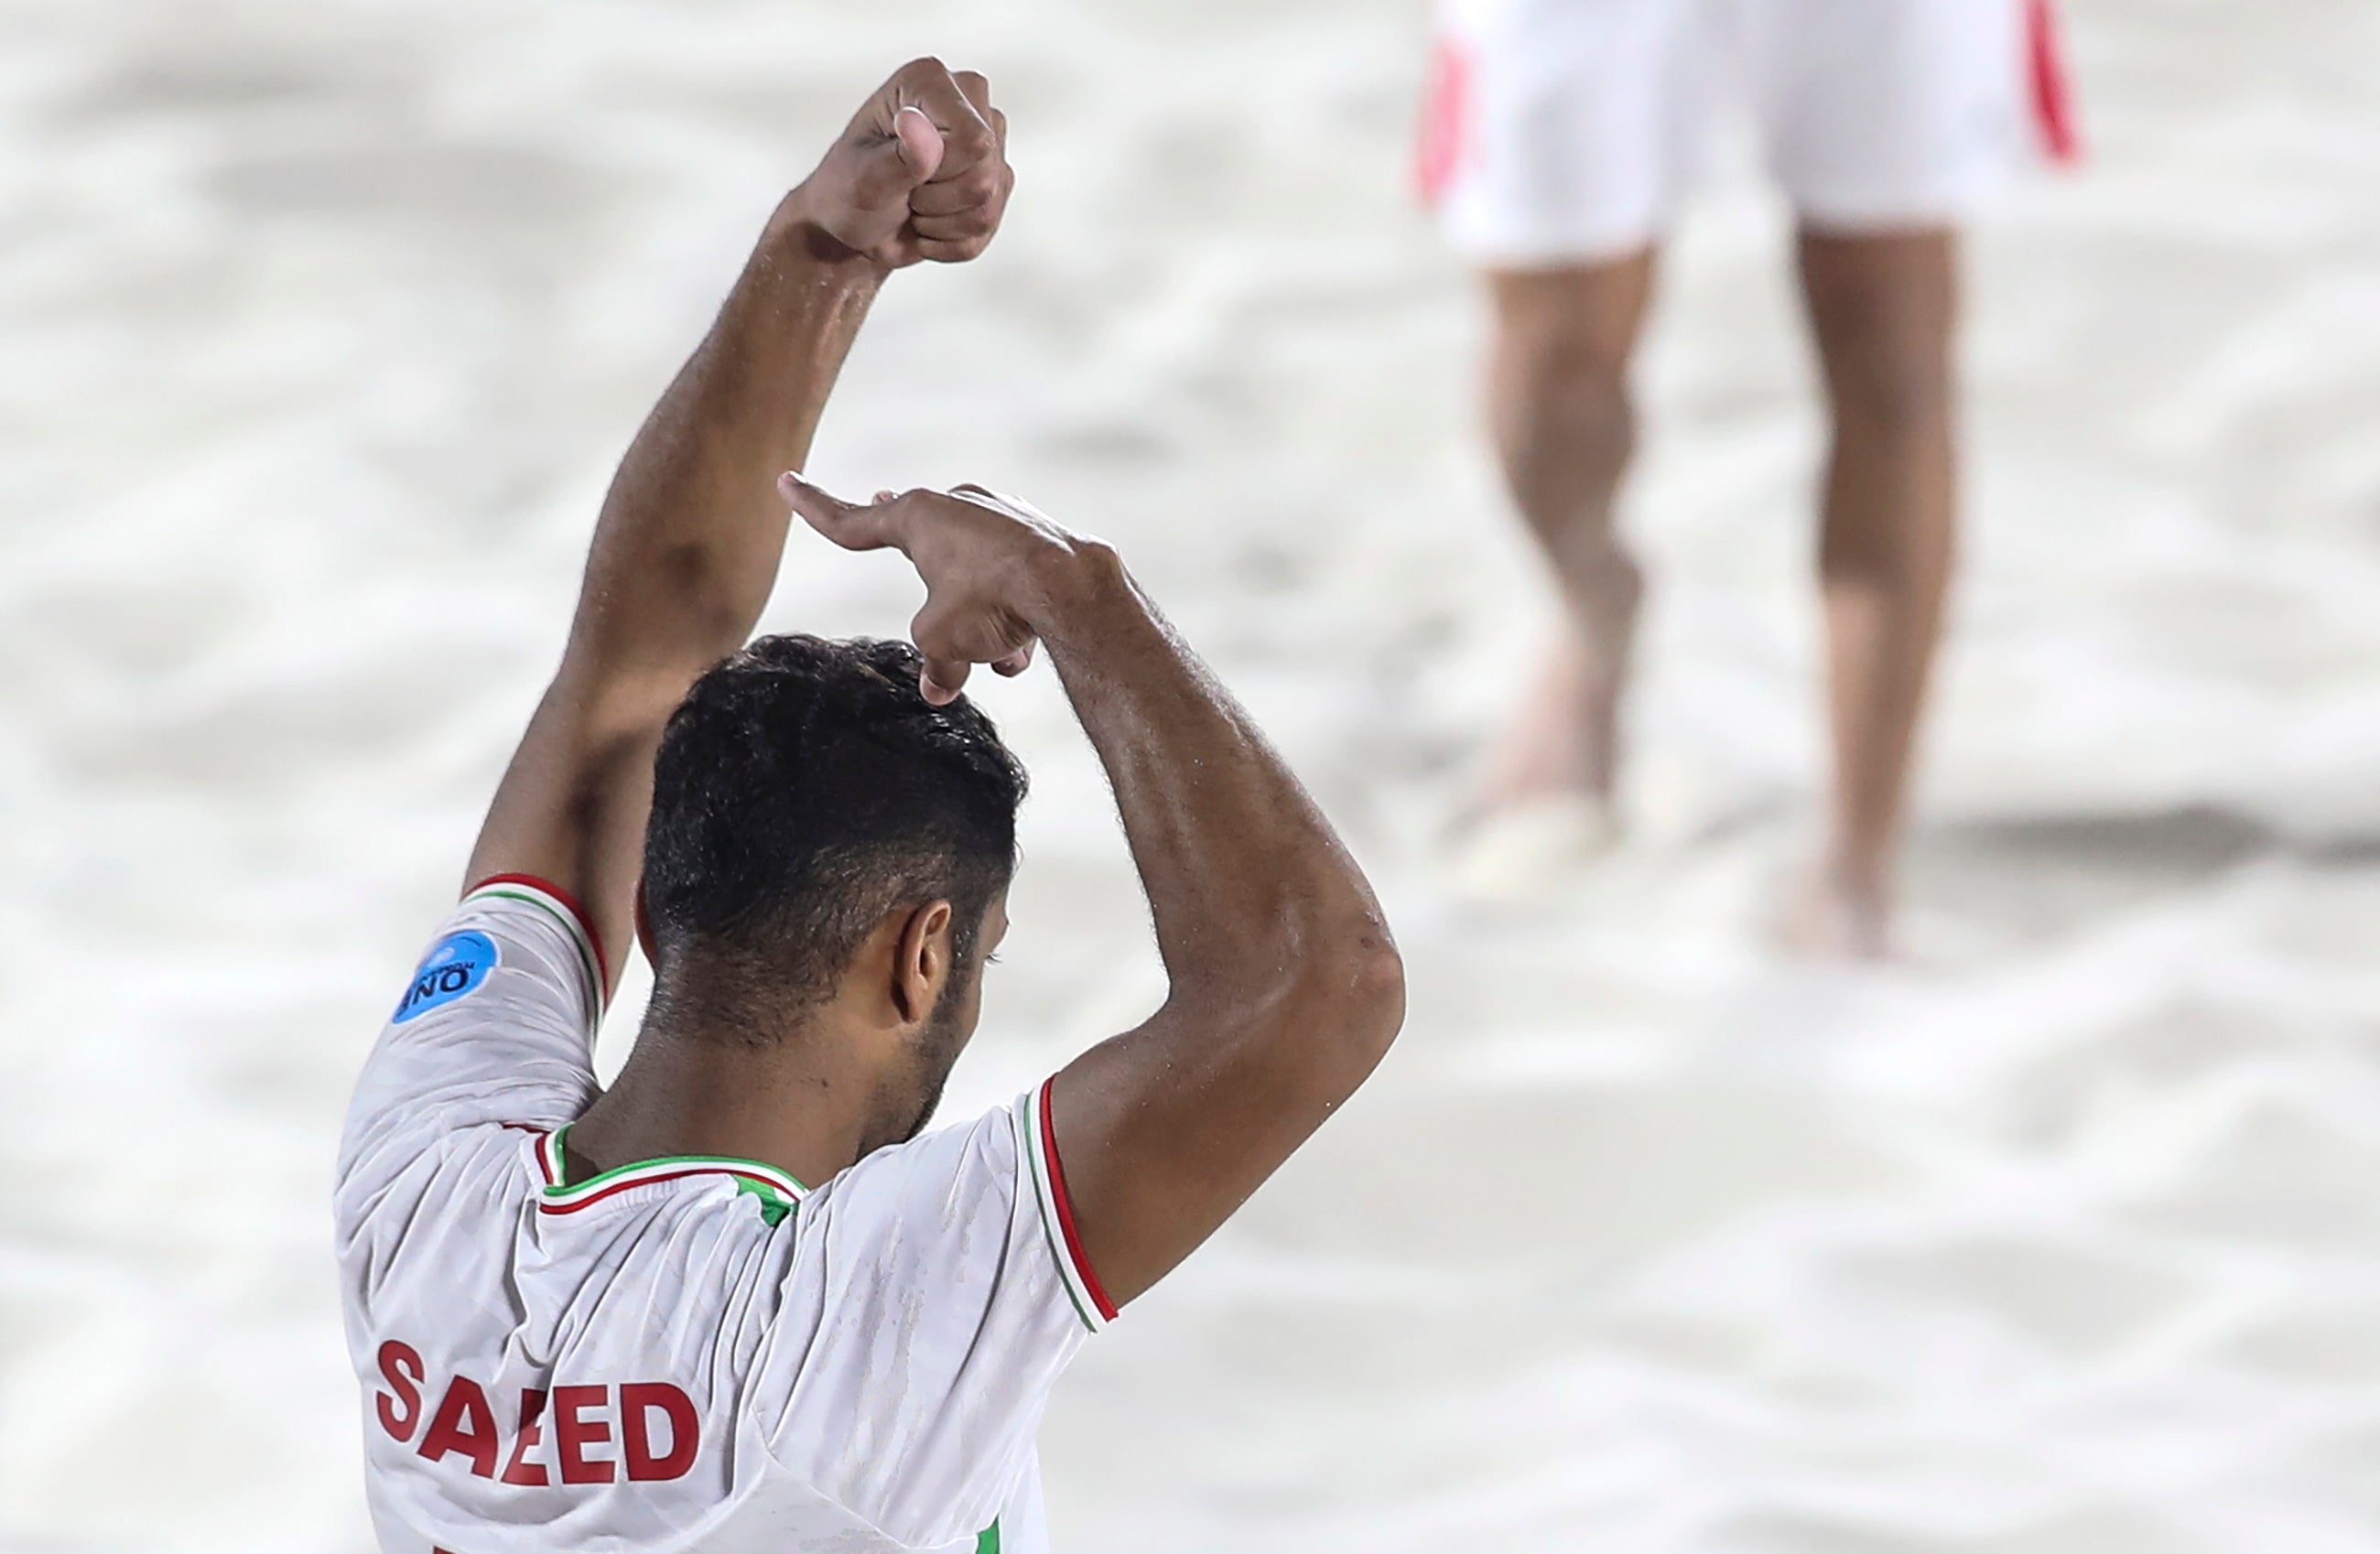 Saeed Piramoun of Iran celebrates after scoring a goal in the Emirates Intercontinental Beach Soccer Cup 2022 final match between Brazil and Iran in Dubai, by pretending to cut his hair in sympathy with protesters